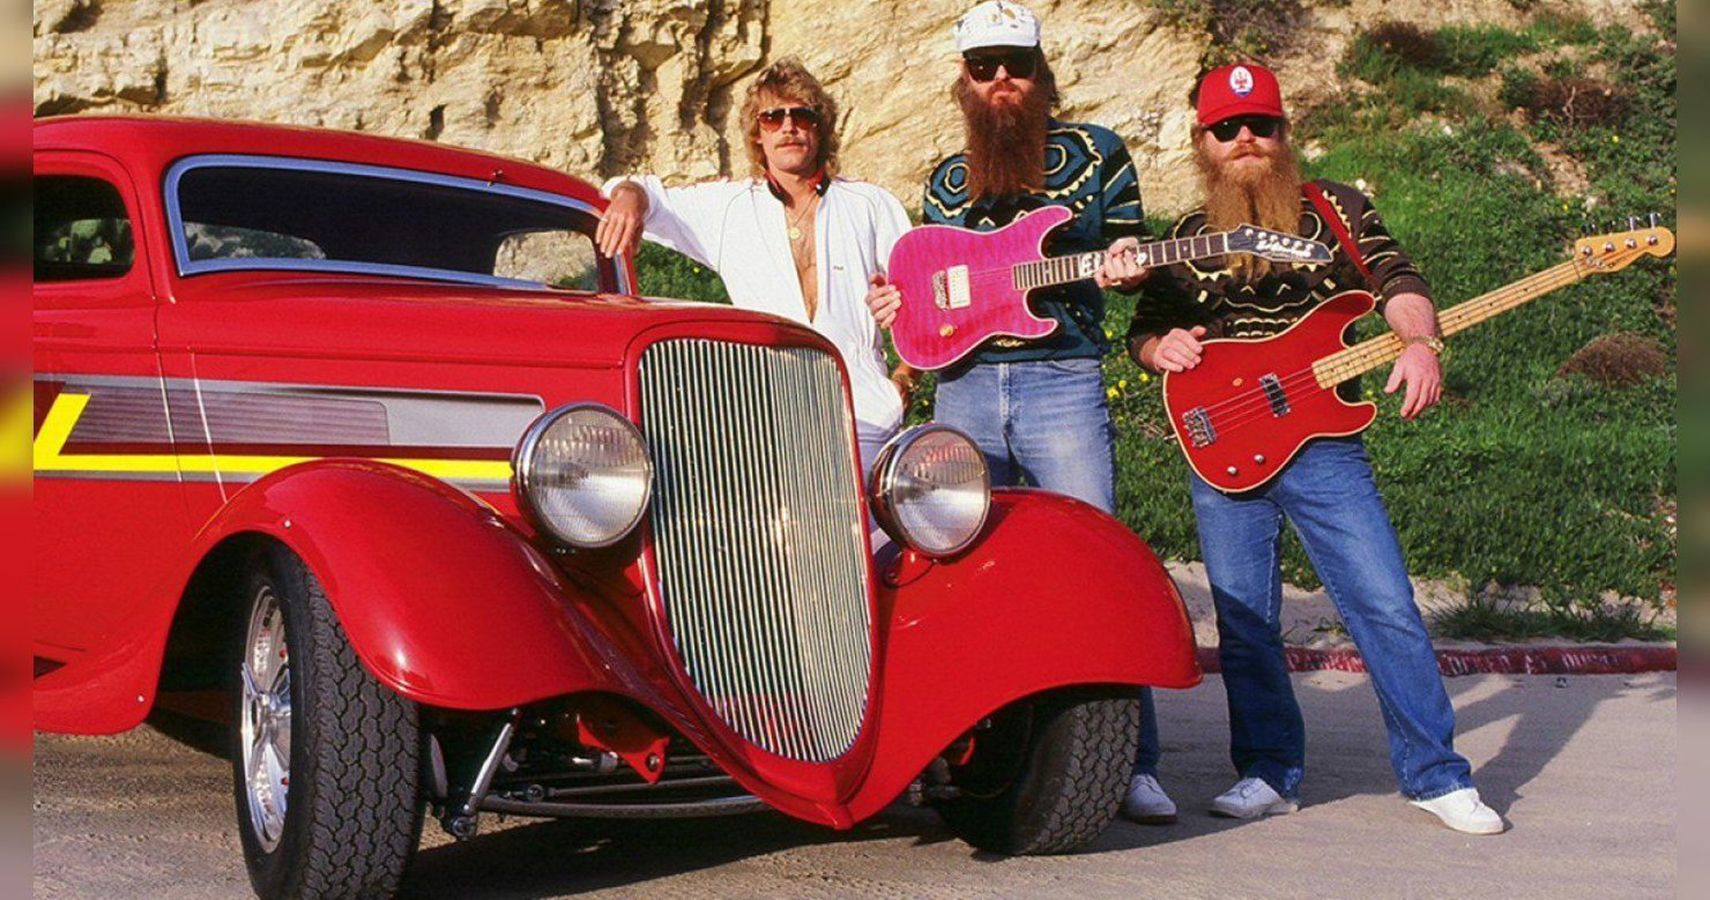 Billy Gibbons ZZ Top Ford Coupe Is Just The Tip Of The Iceberg When It Comes To His Collection For Hot Rods, Or Even His Passion For It